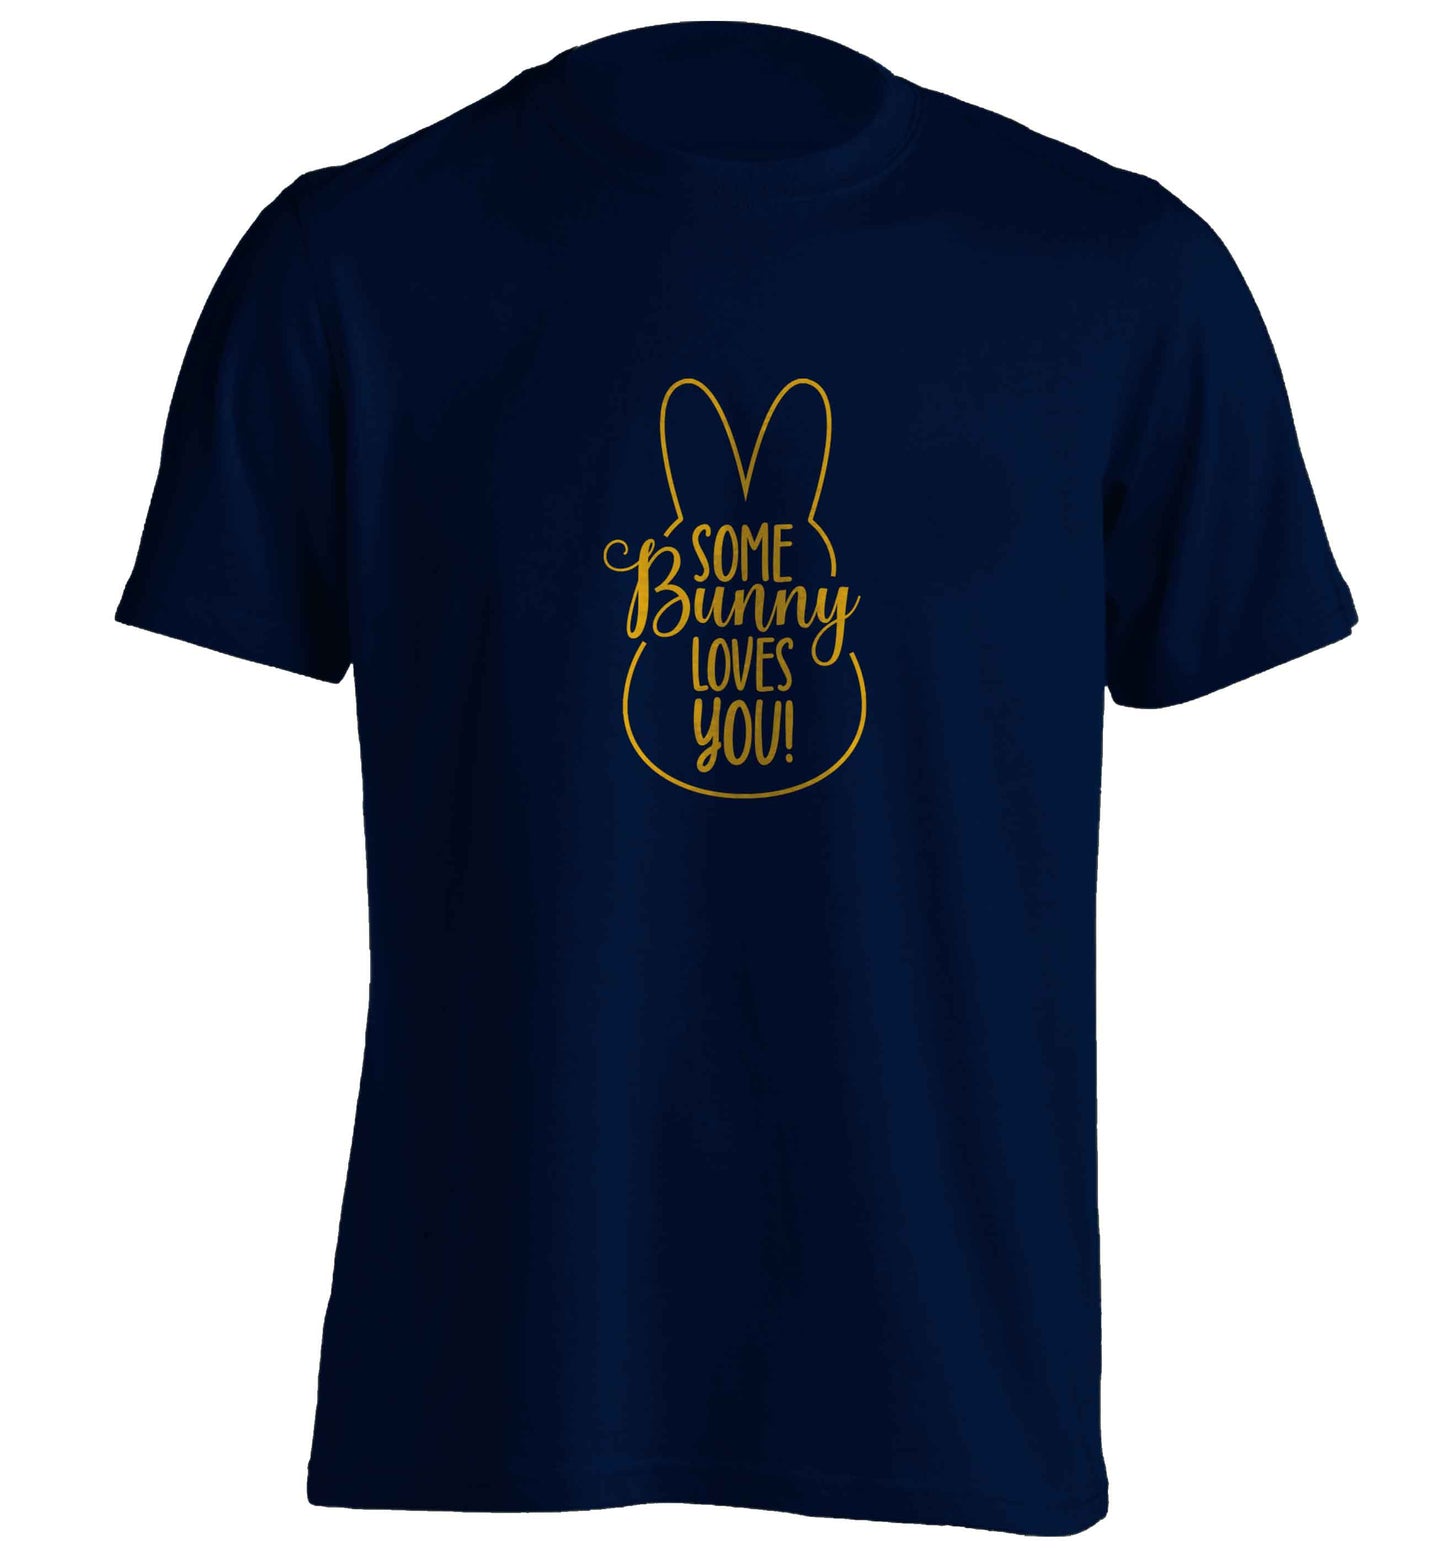 Some bunny loves you adults unisex navy Tshirt 2XL